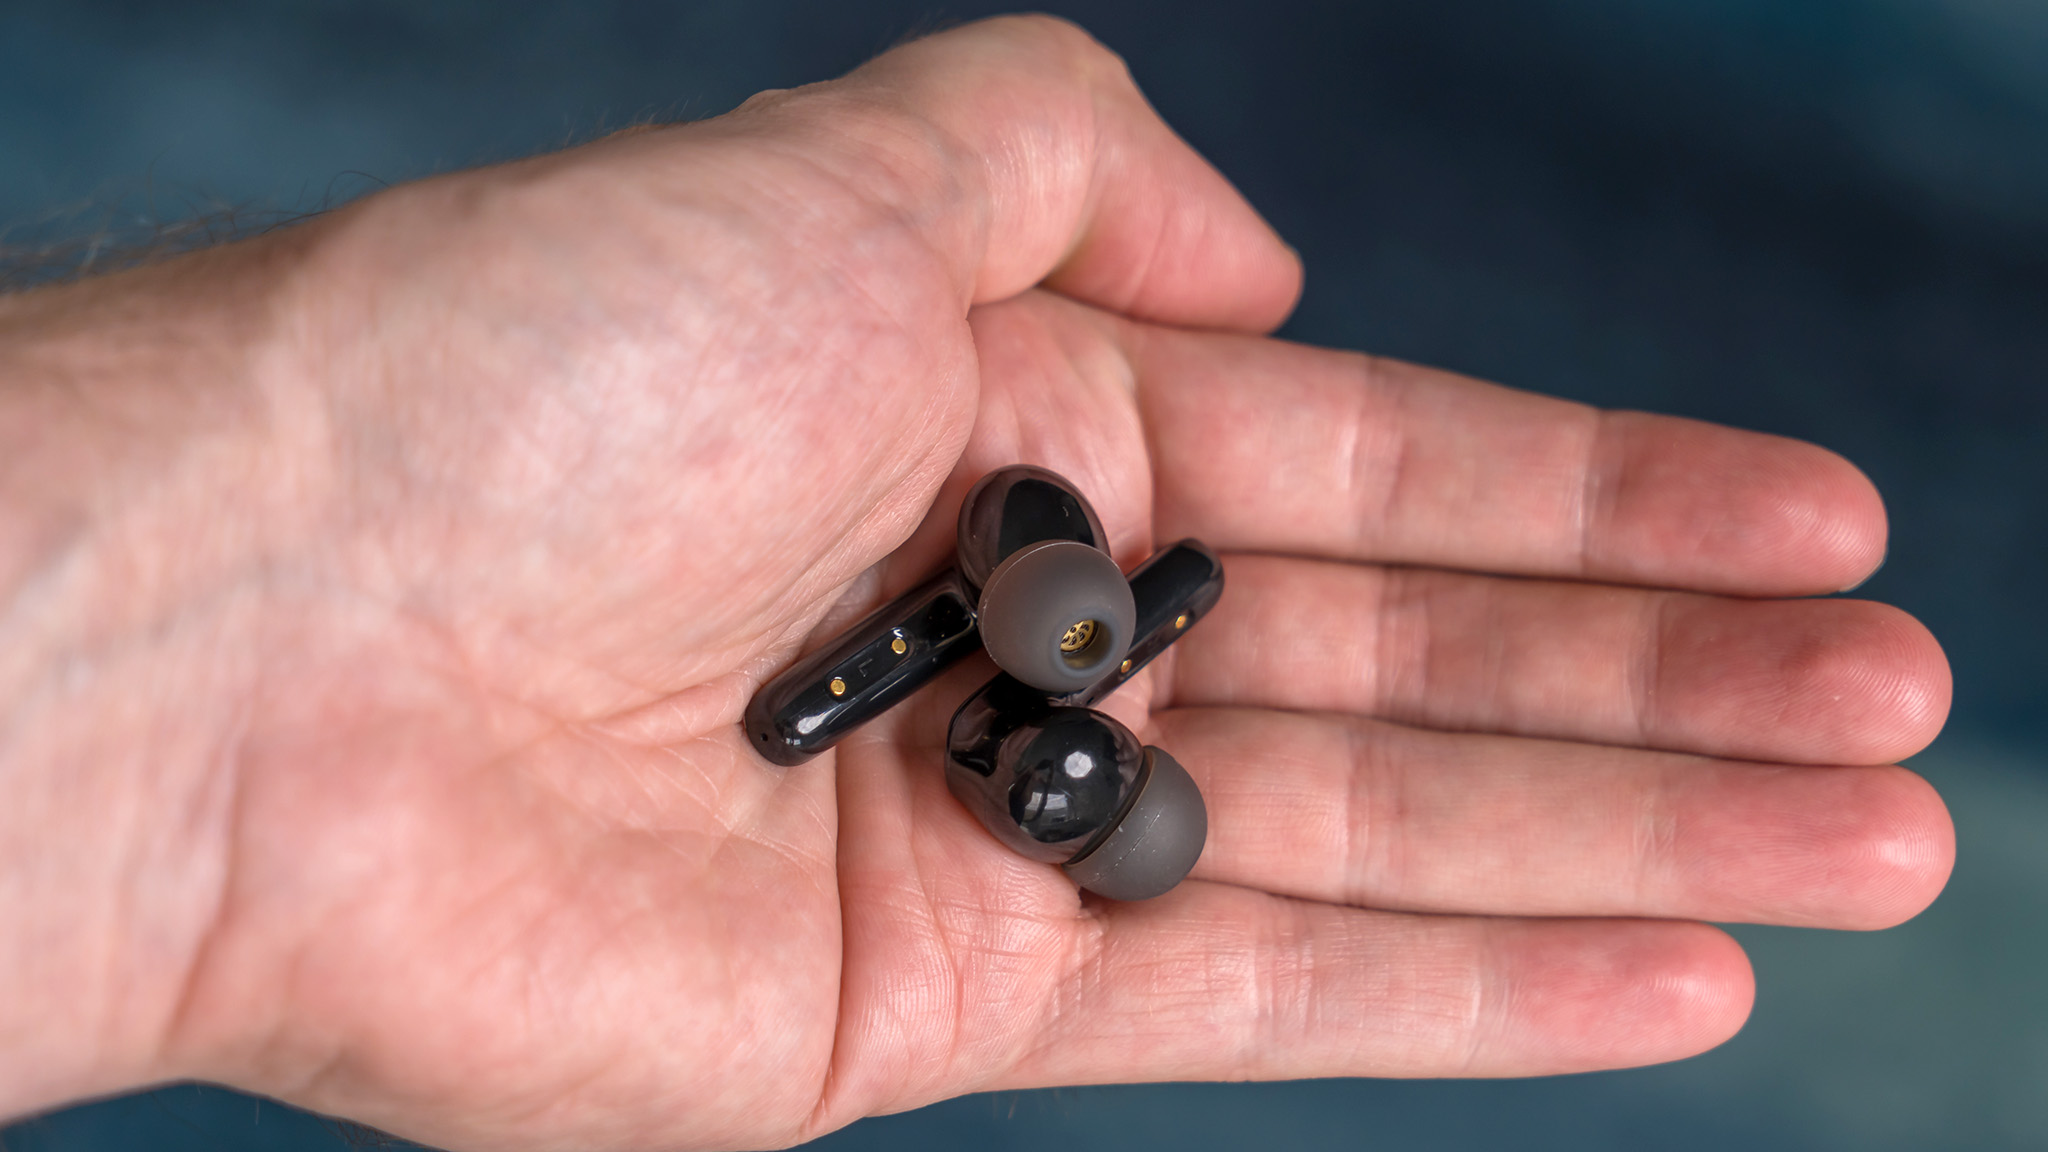 Anker Soundcore Life P3 earbuds in hand.